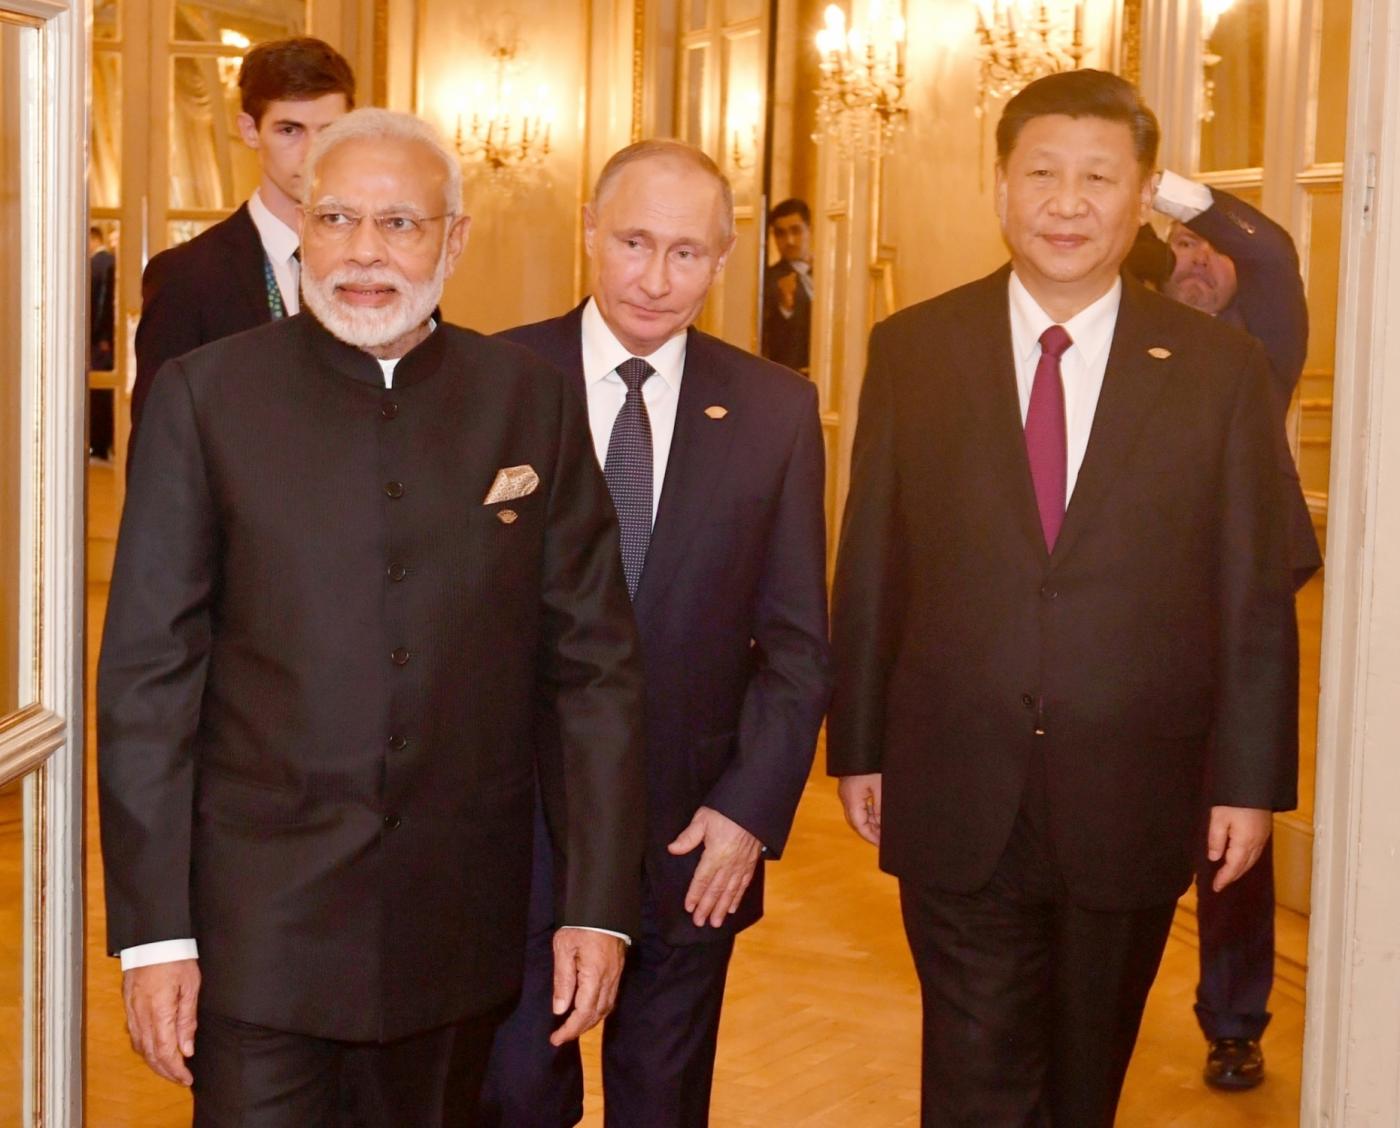 Buenos Aires: Prime Minister Narendra Modi, Russian President Vladimir Putin and Chinese President Xi Jinping at the RIC (Russia, India, China) Informal Summit, in Buenos Aires, Argentina on Nov 30, 2018. (Photo: IANS/PIB) by .